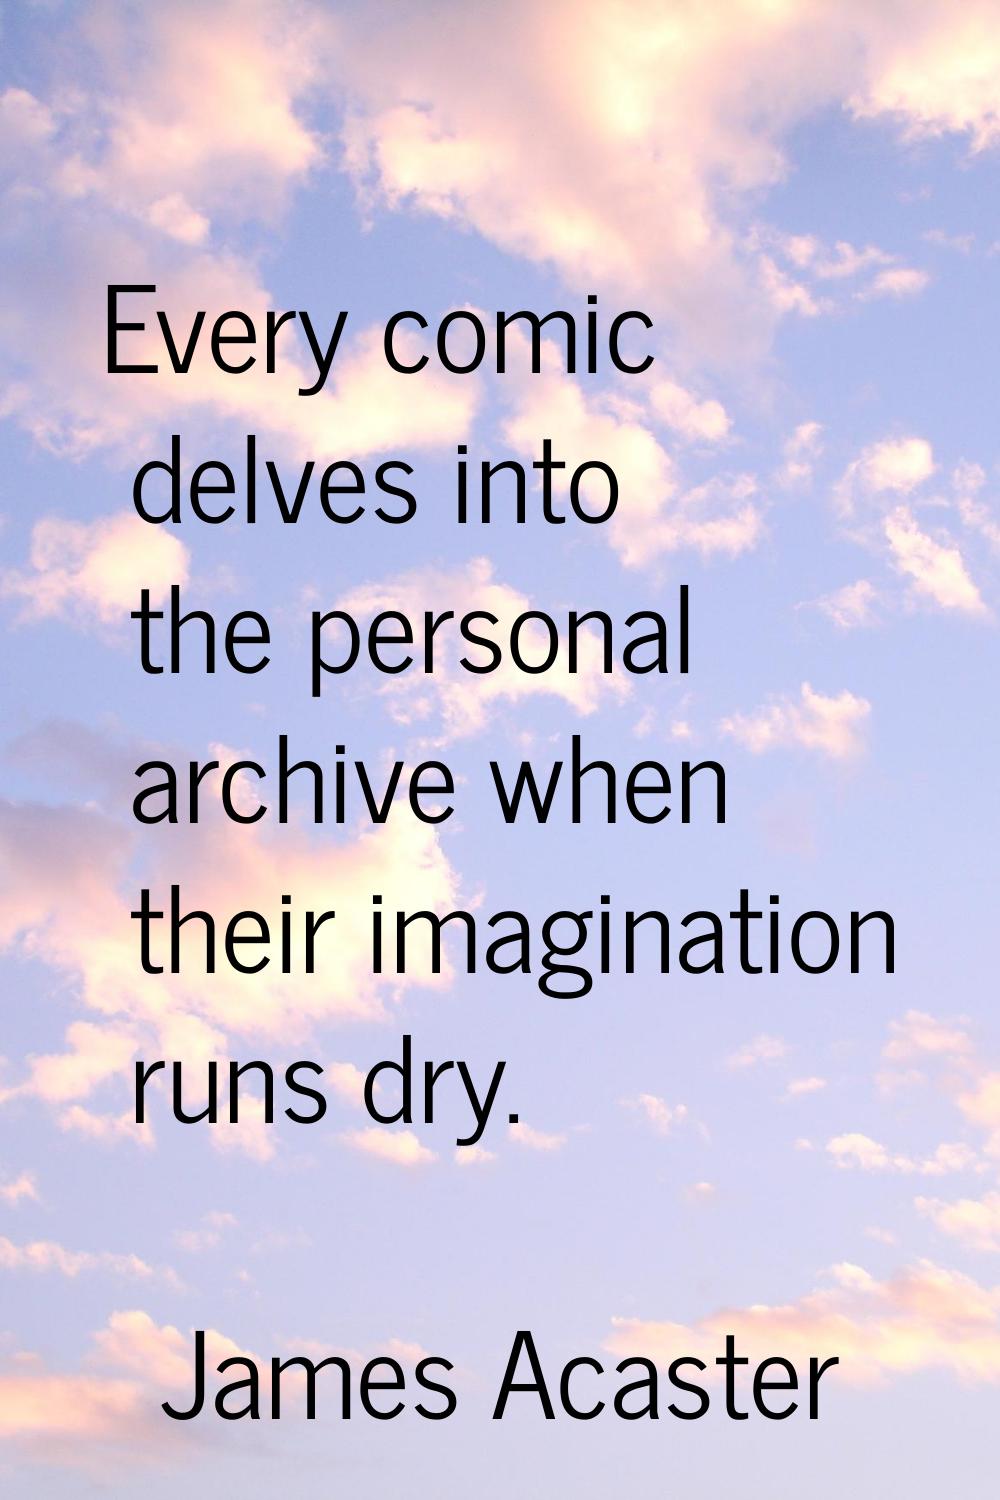 Every comic delves into the personal archive when their imagination runs dry.